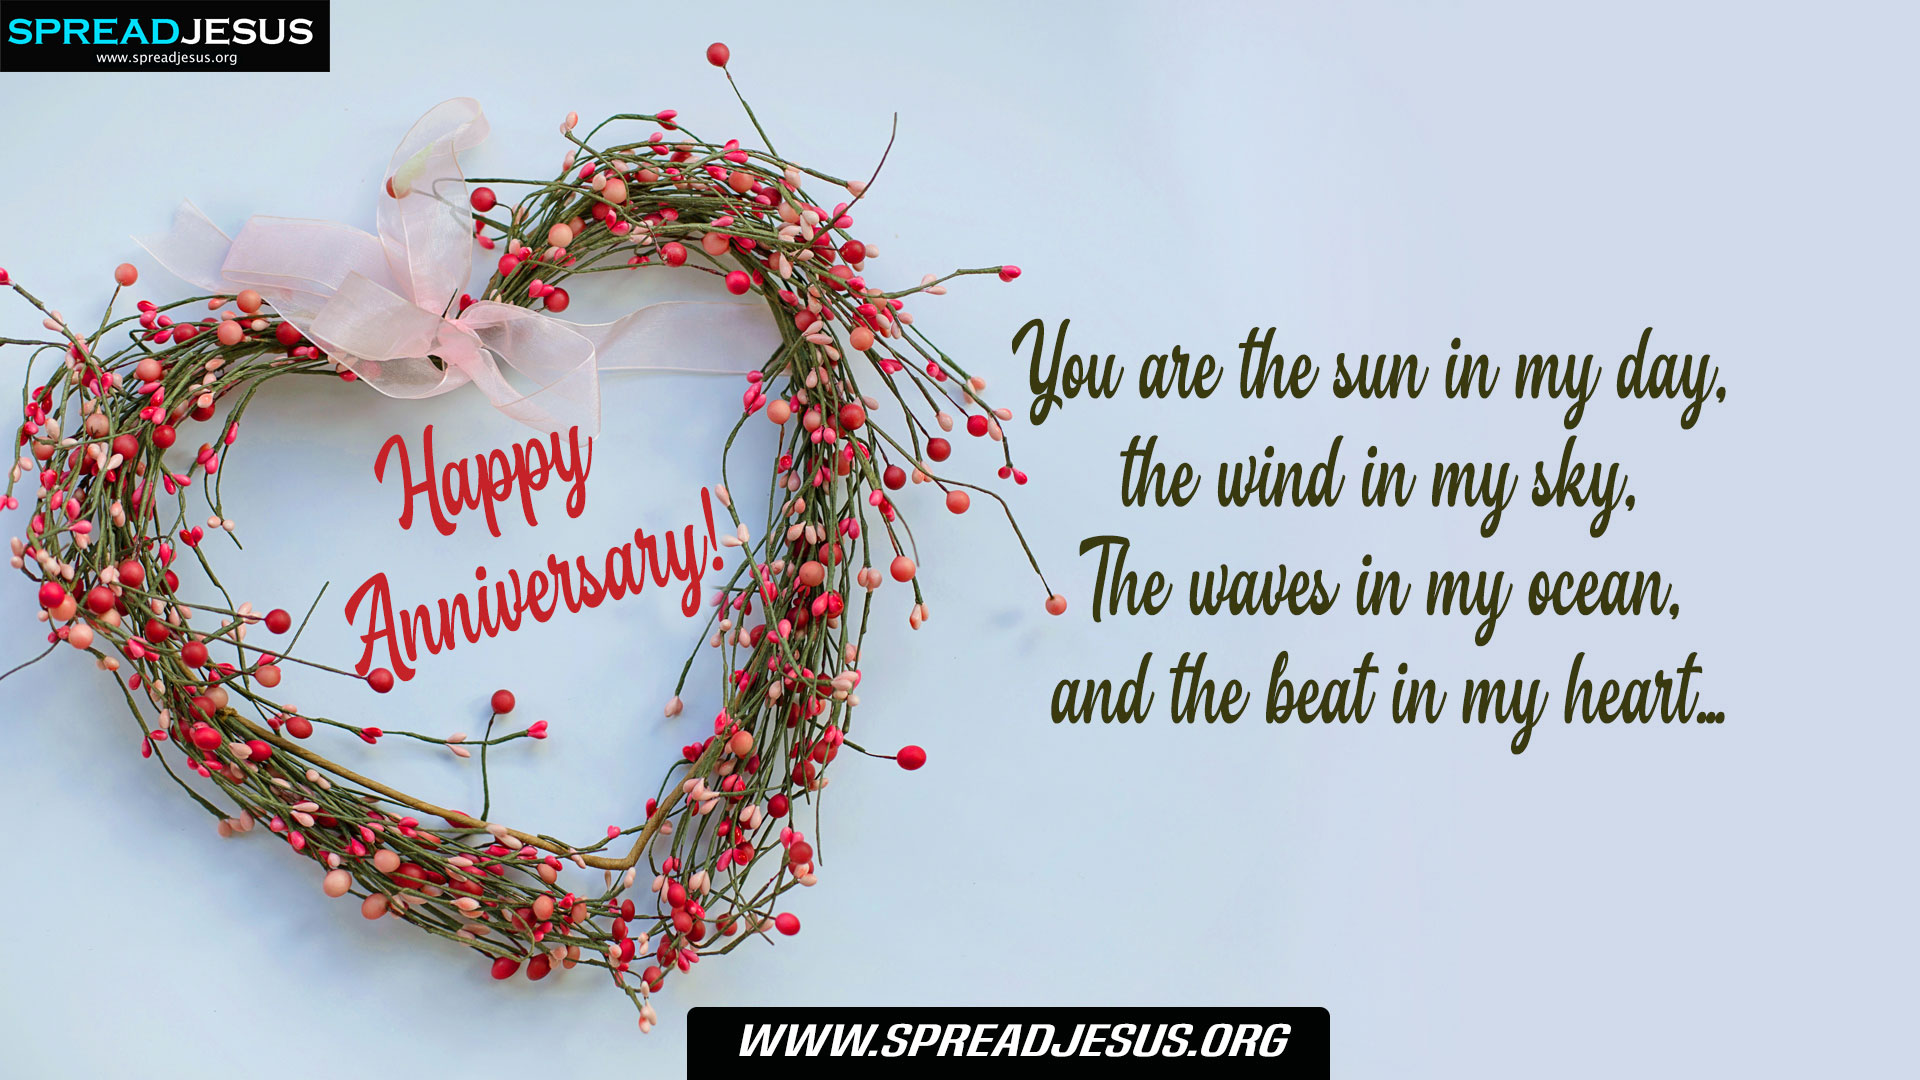 Happy Anniversary! You are the sun in my day